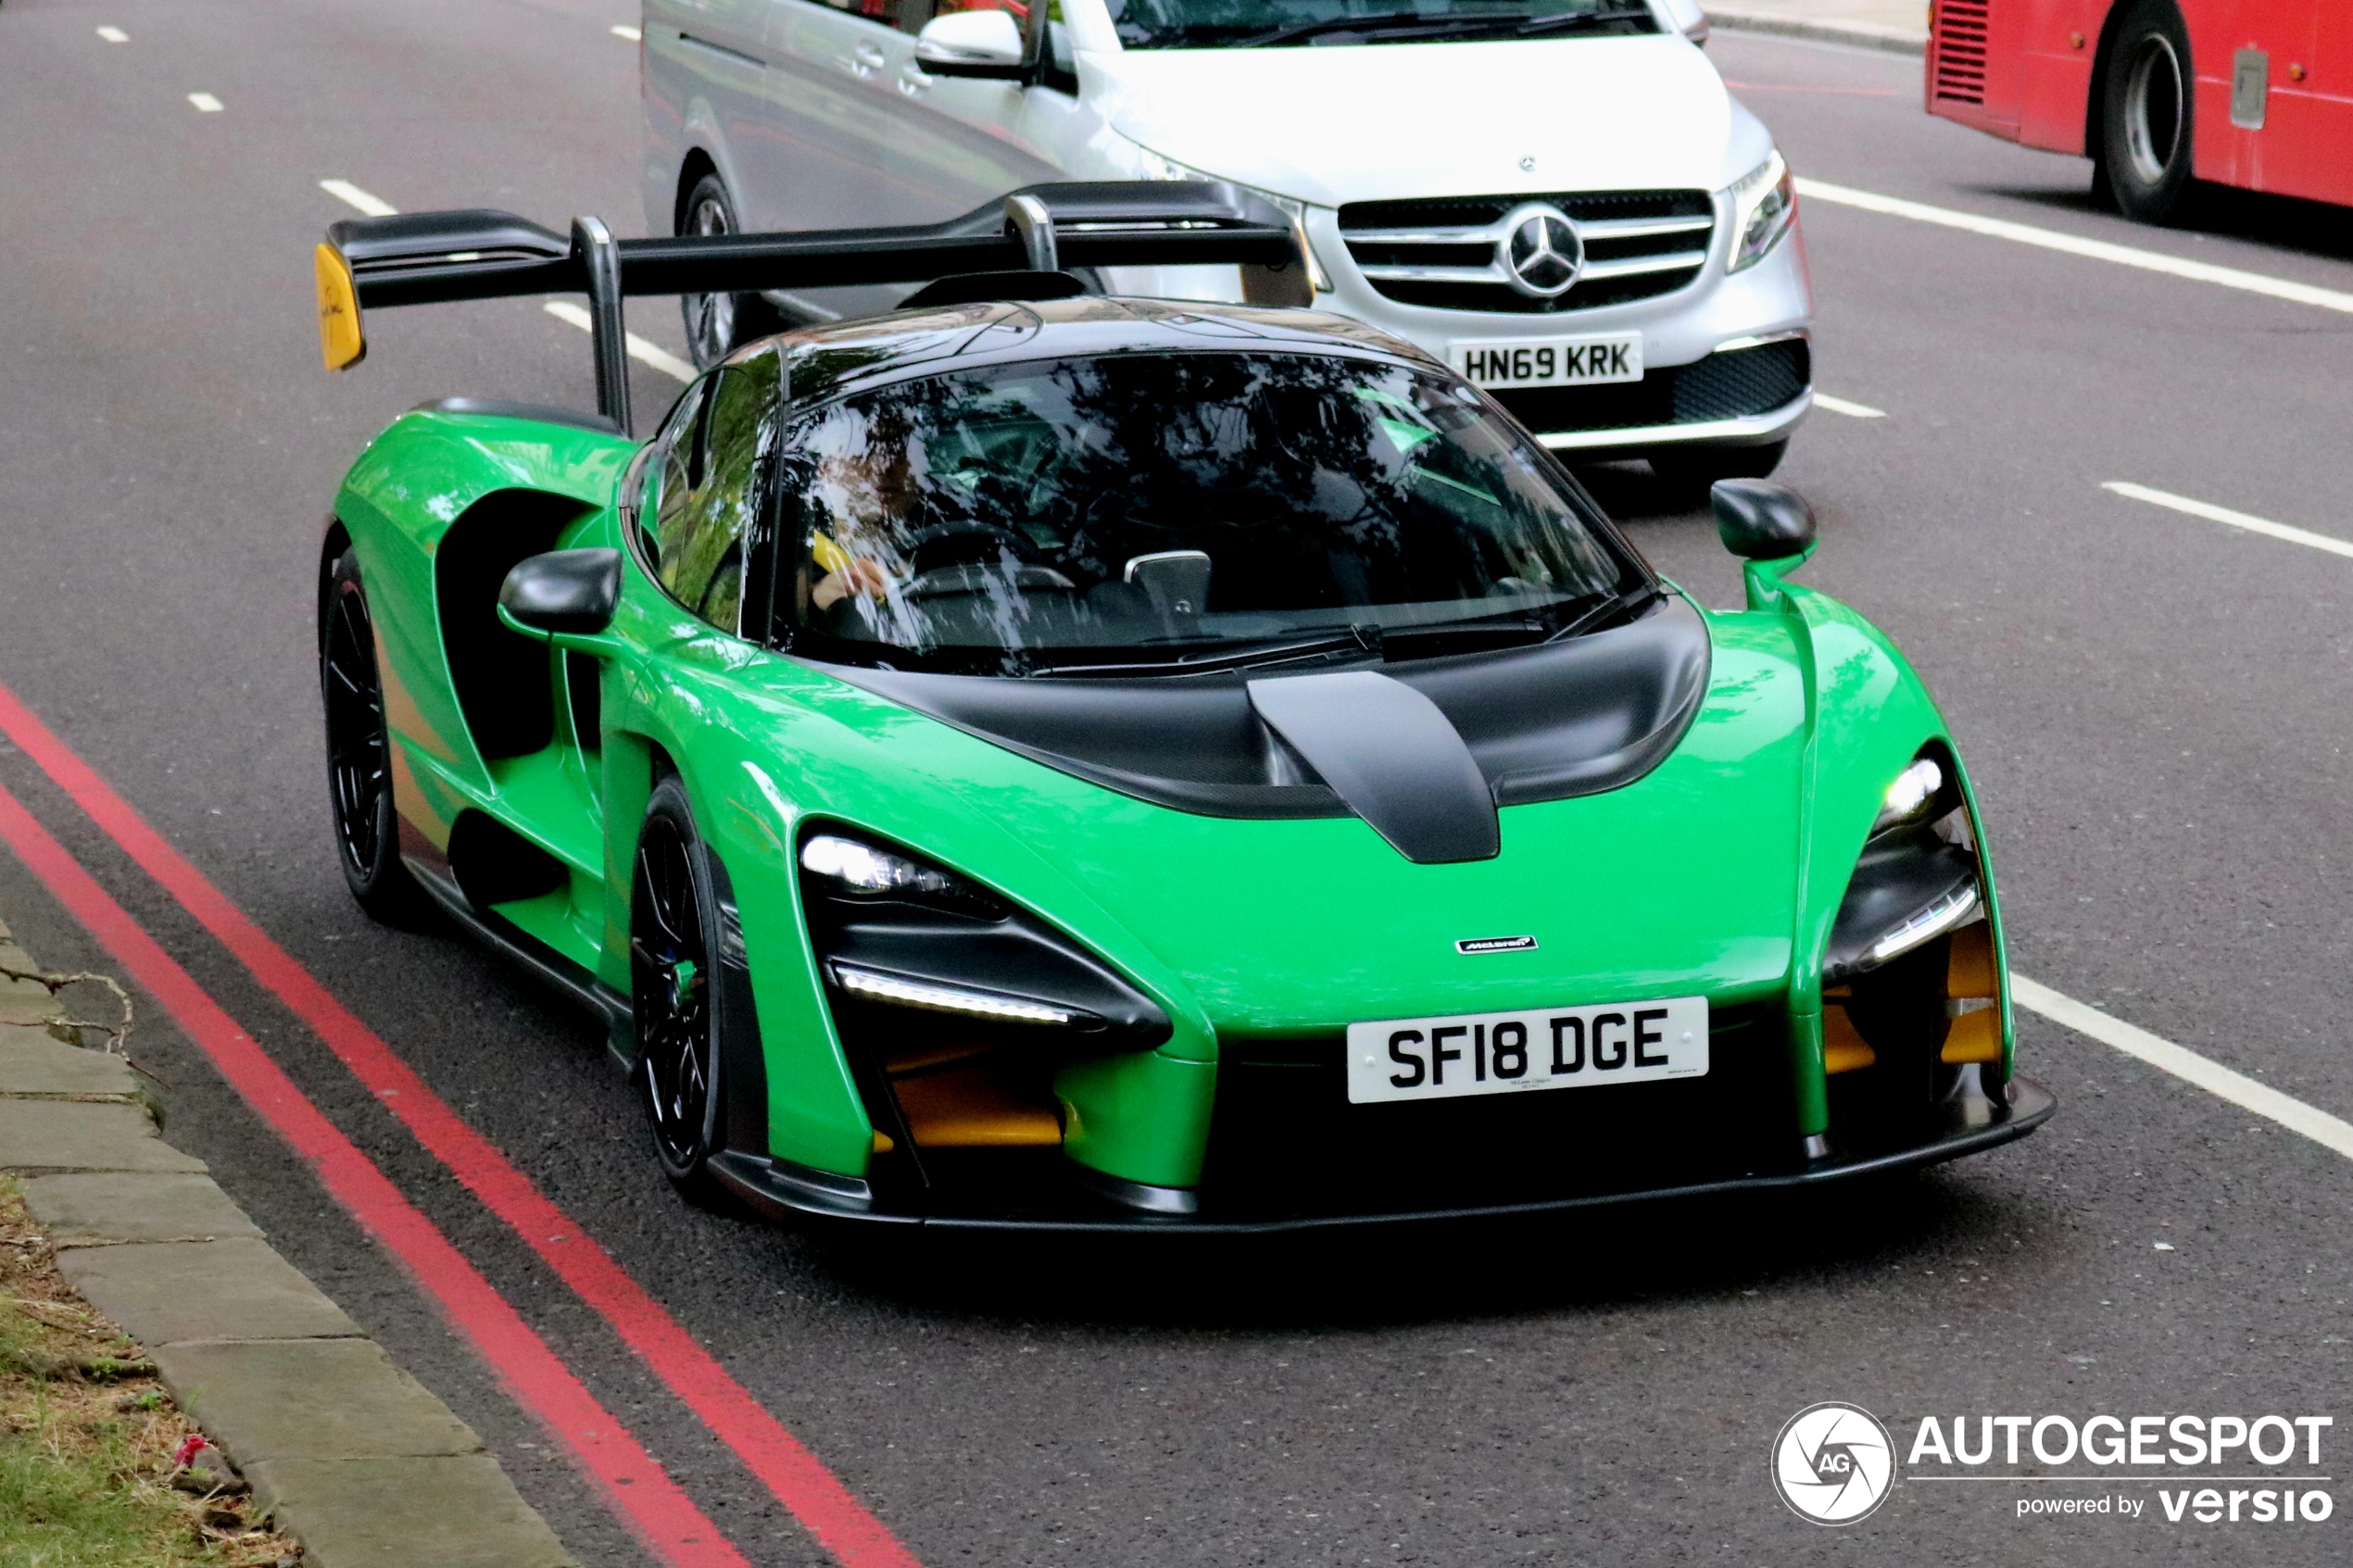 A new Senna shows up in London